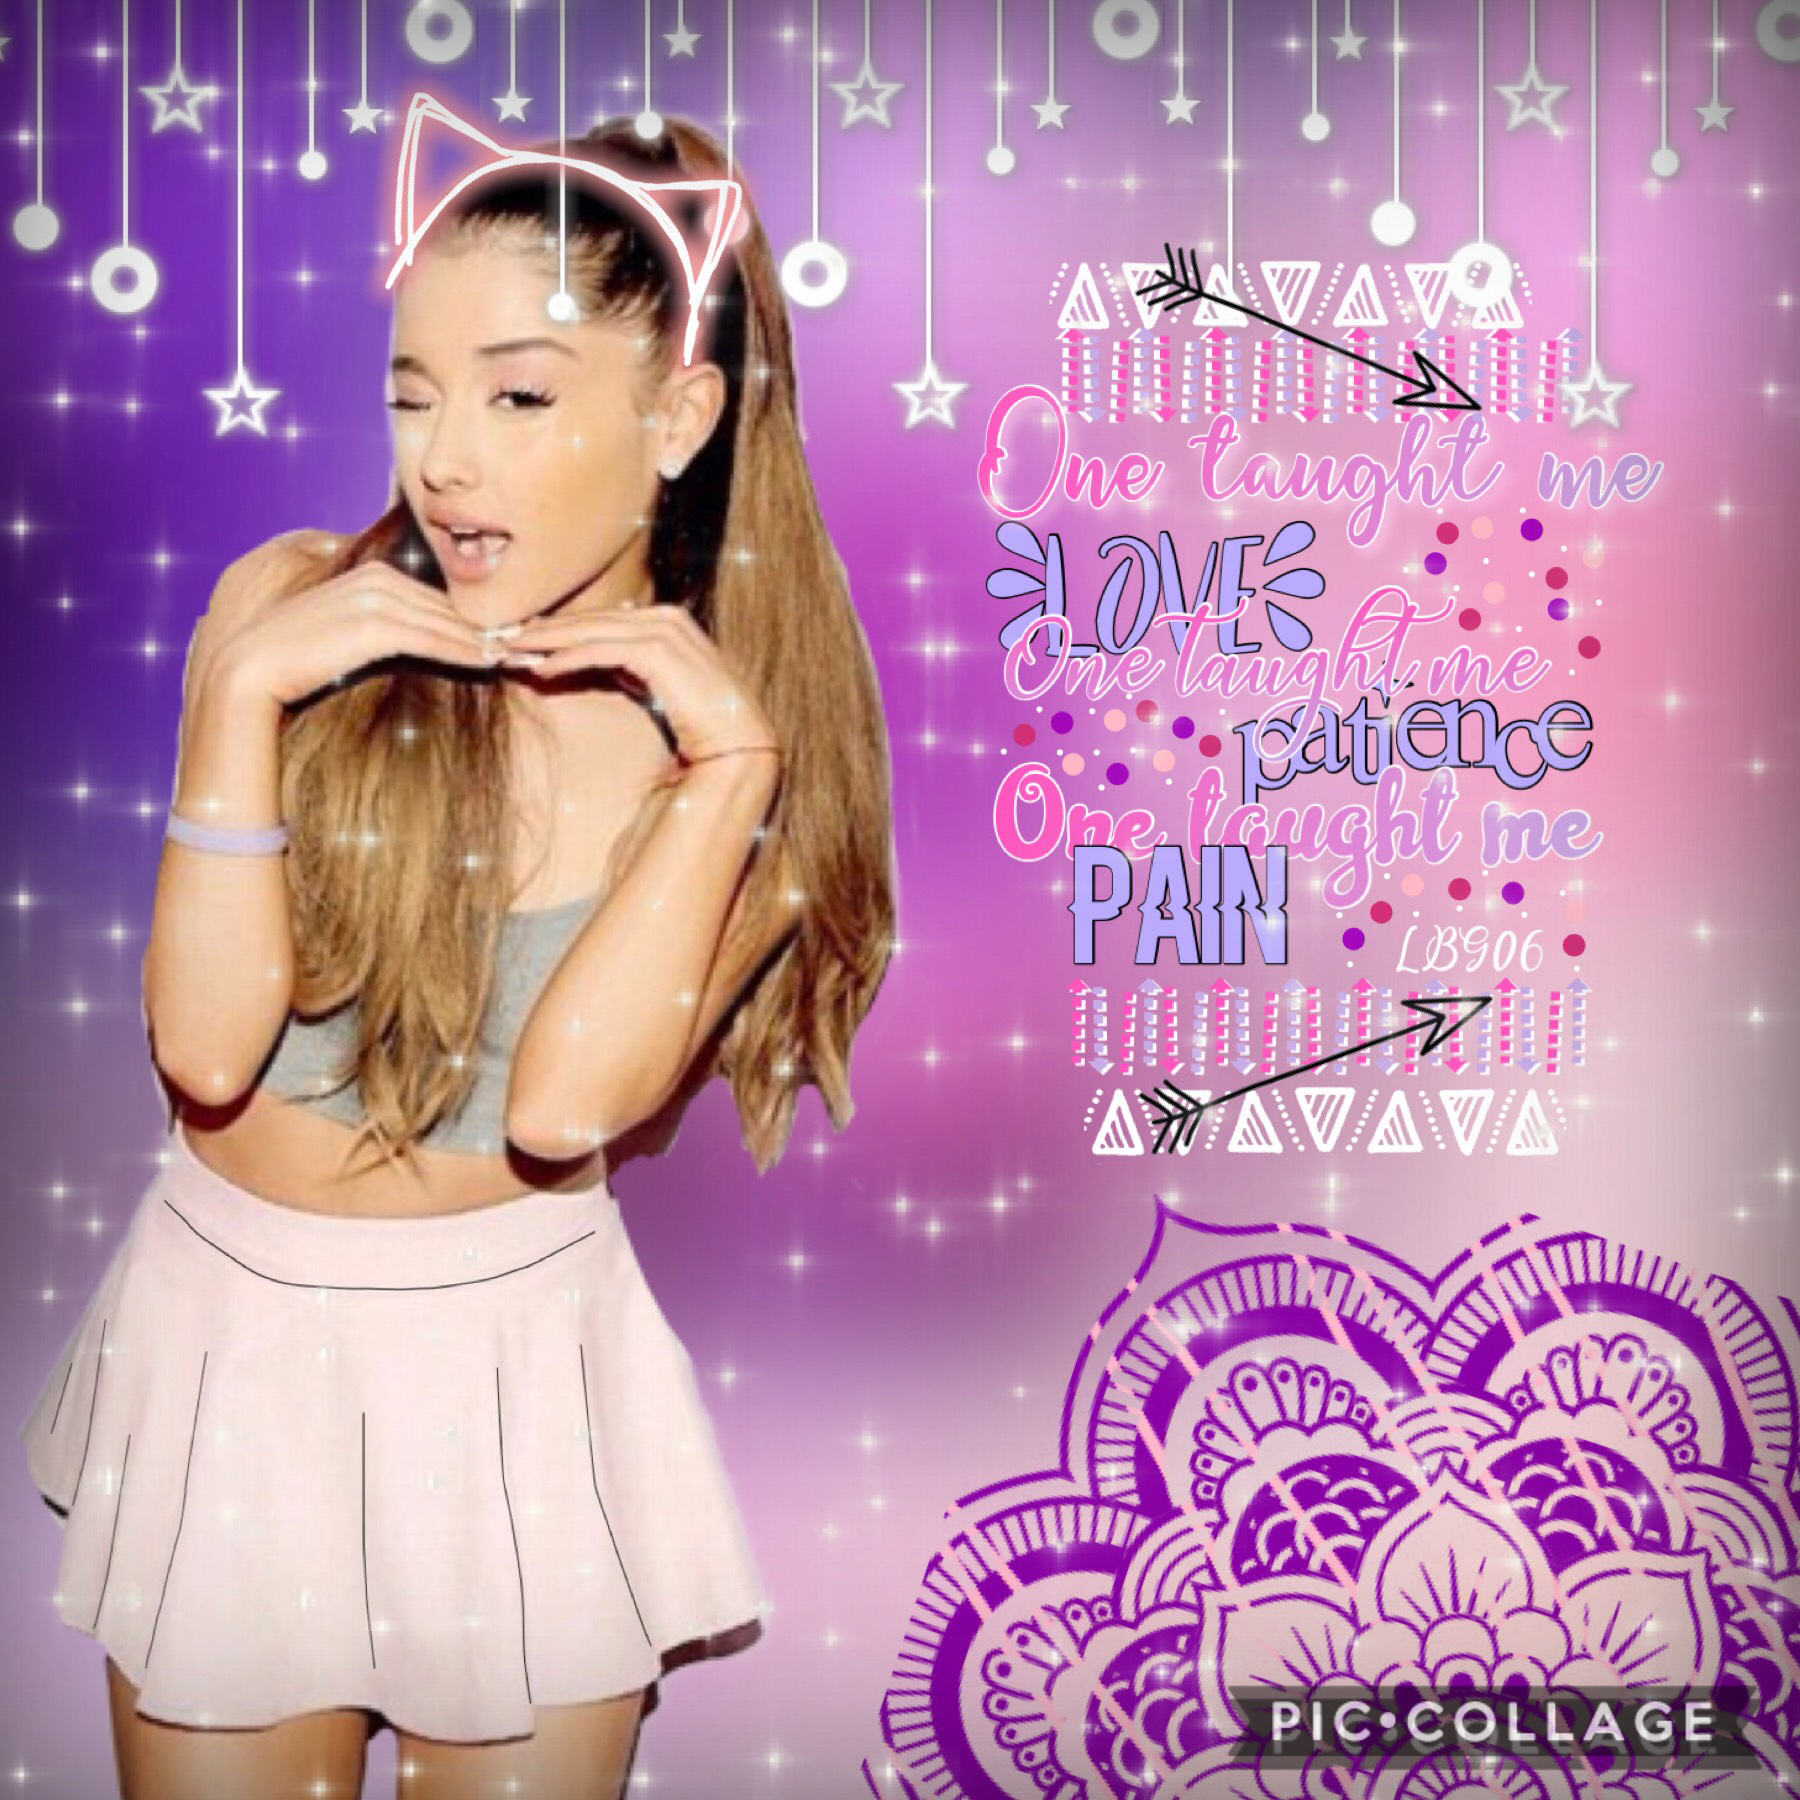 💕💜TAPPY💜💕

I love this songgg it’s stuck in my head!, 💕😍🎧

Q// guess is this song called?
A// hehehehe im not sayinggg

💕Xoxoxo💜